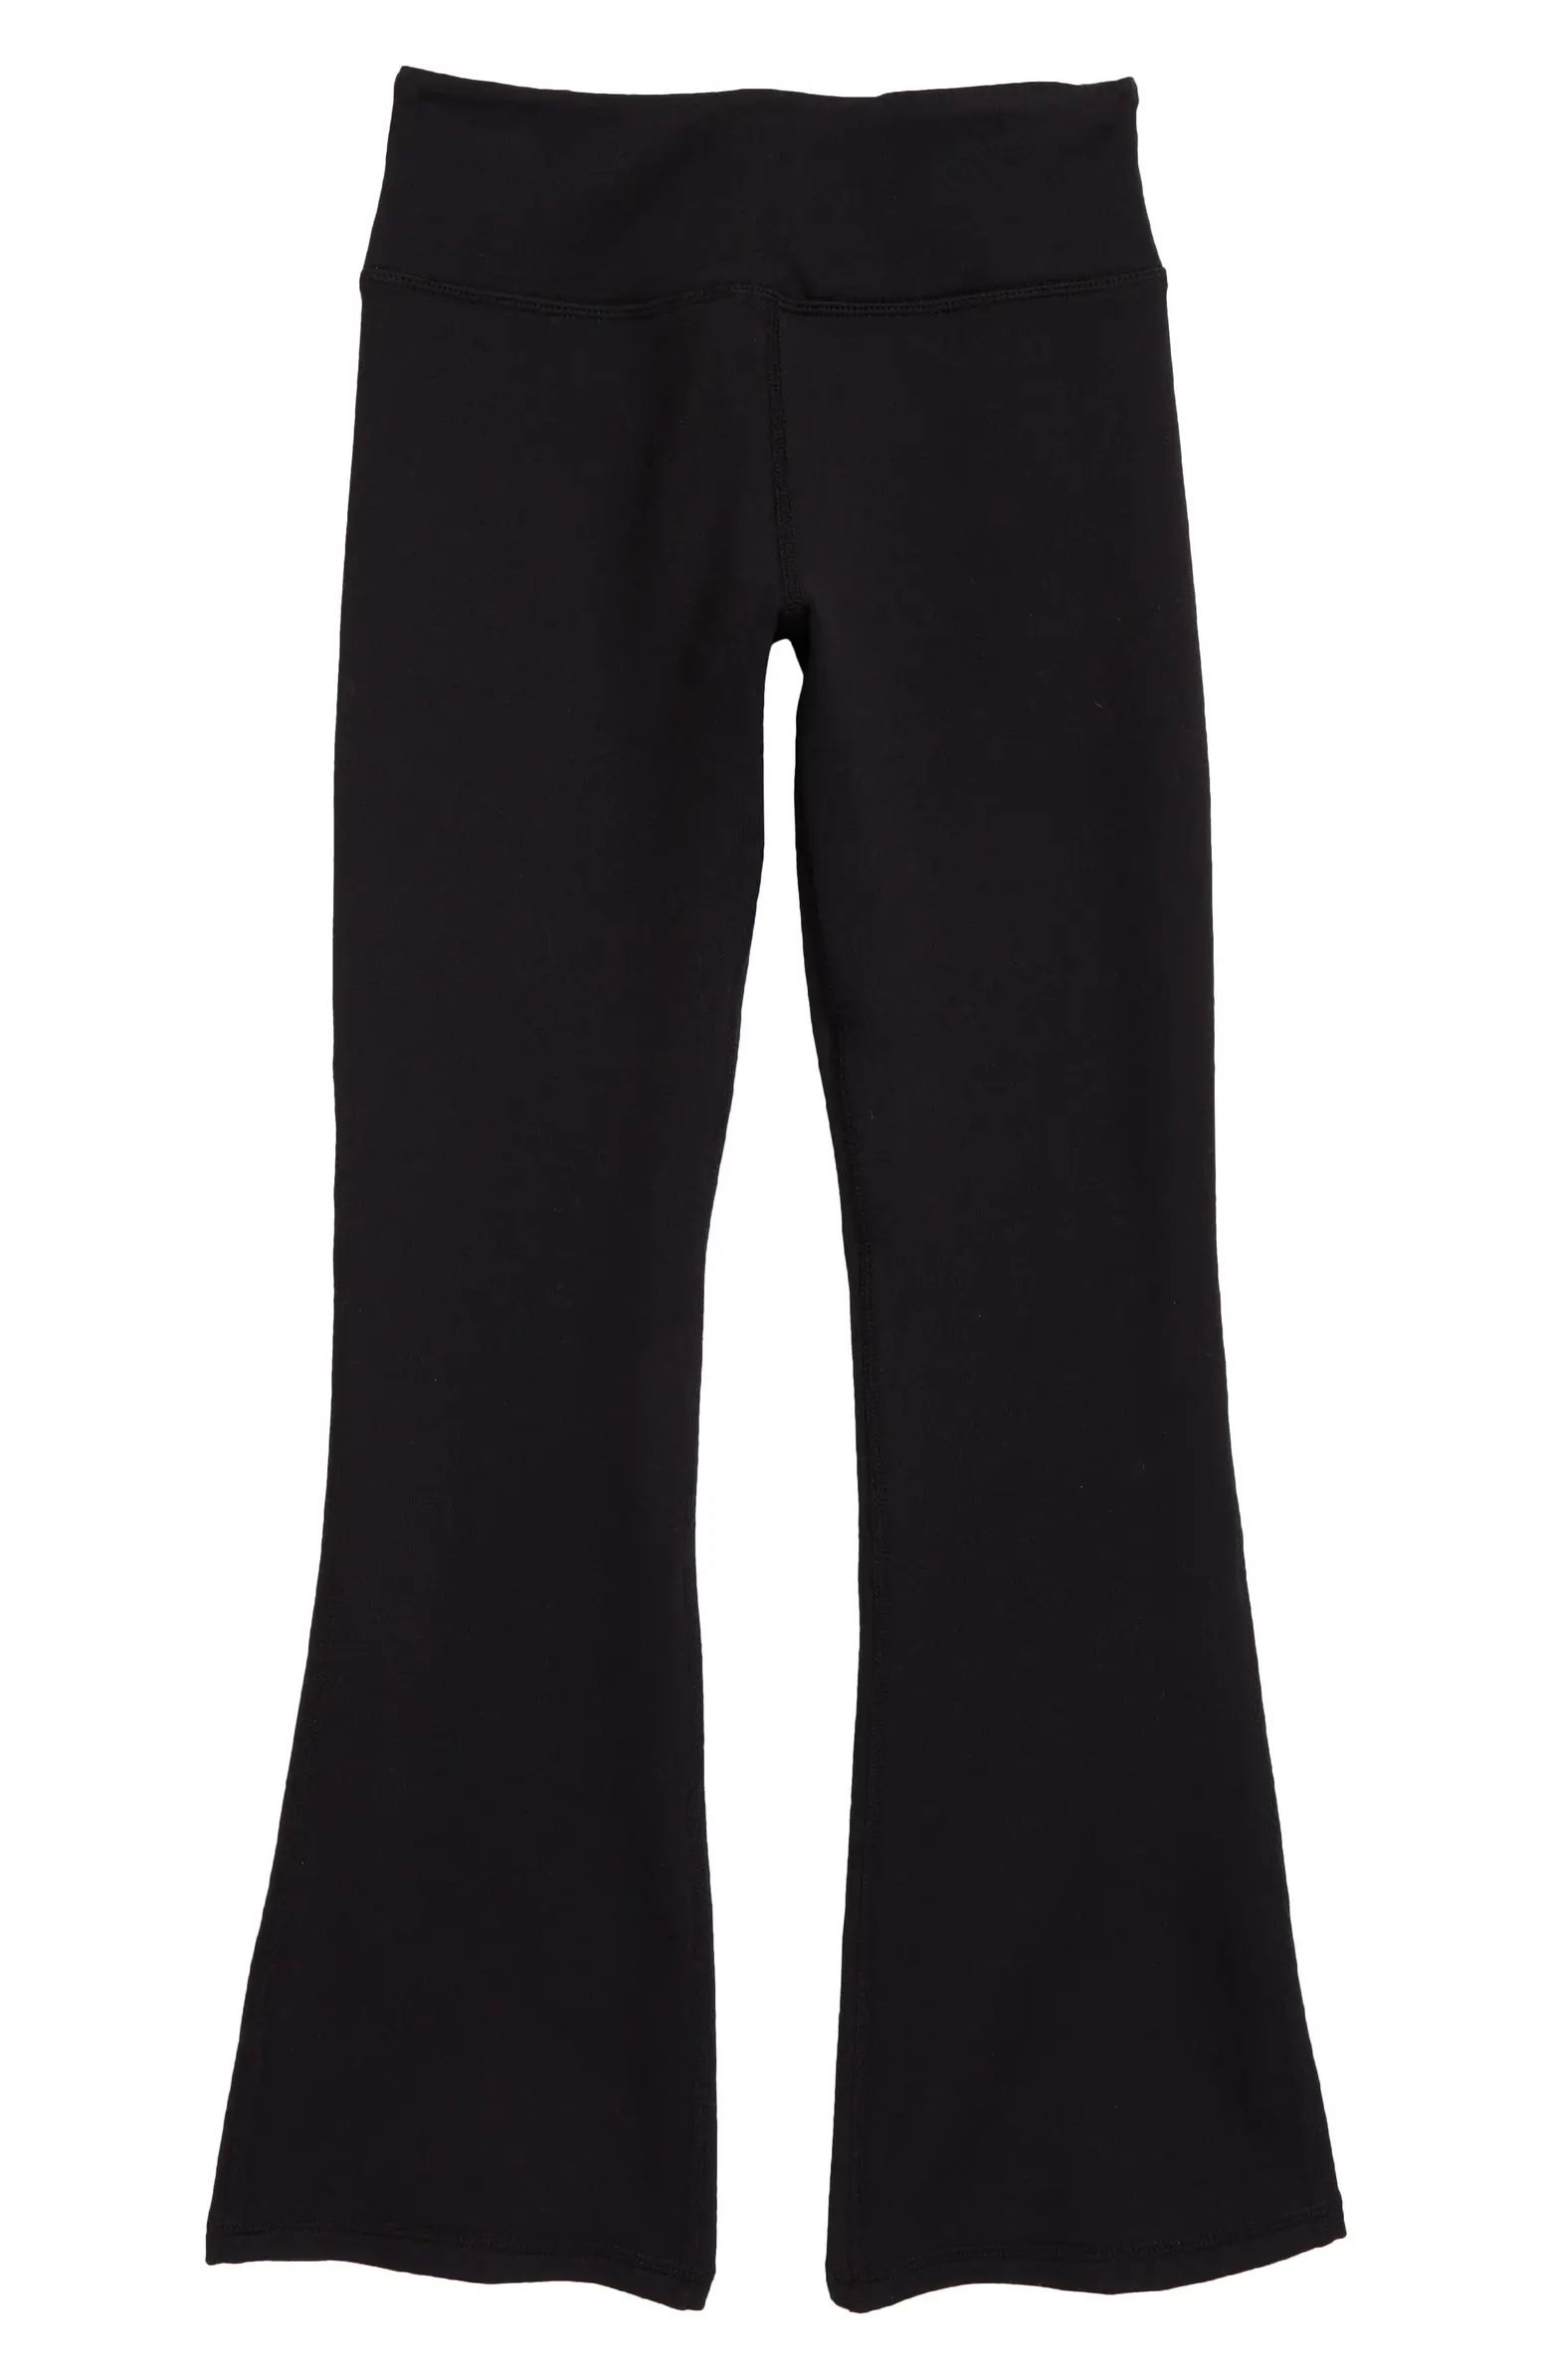 Kids' Live In High Waist Barely Flare Pants | Nordstrom